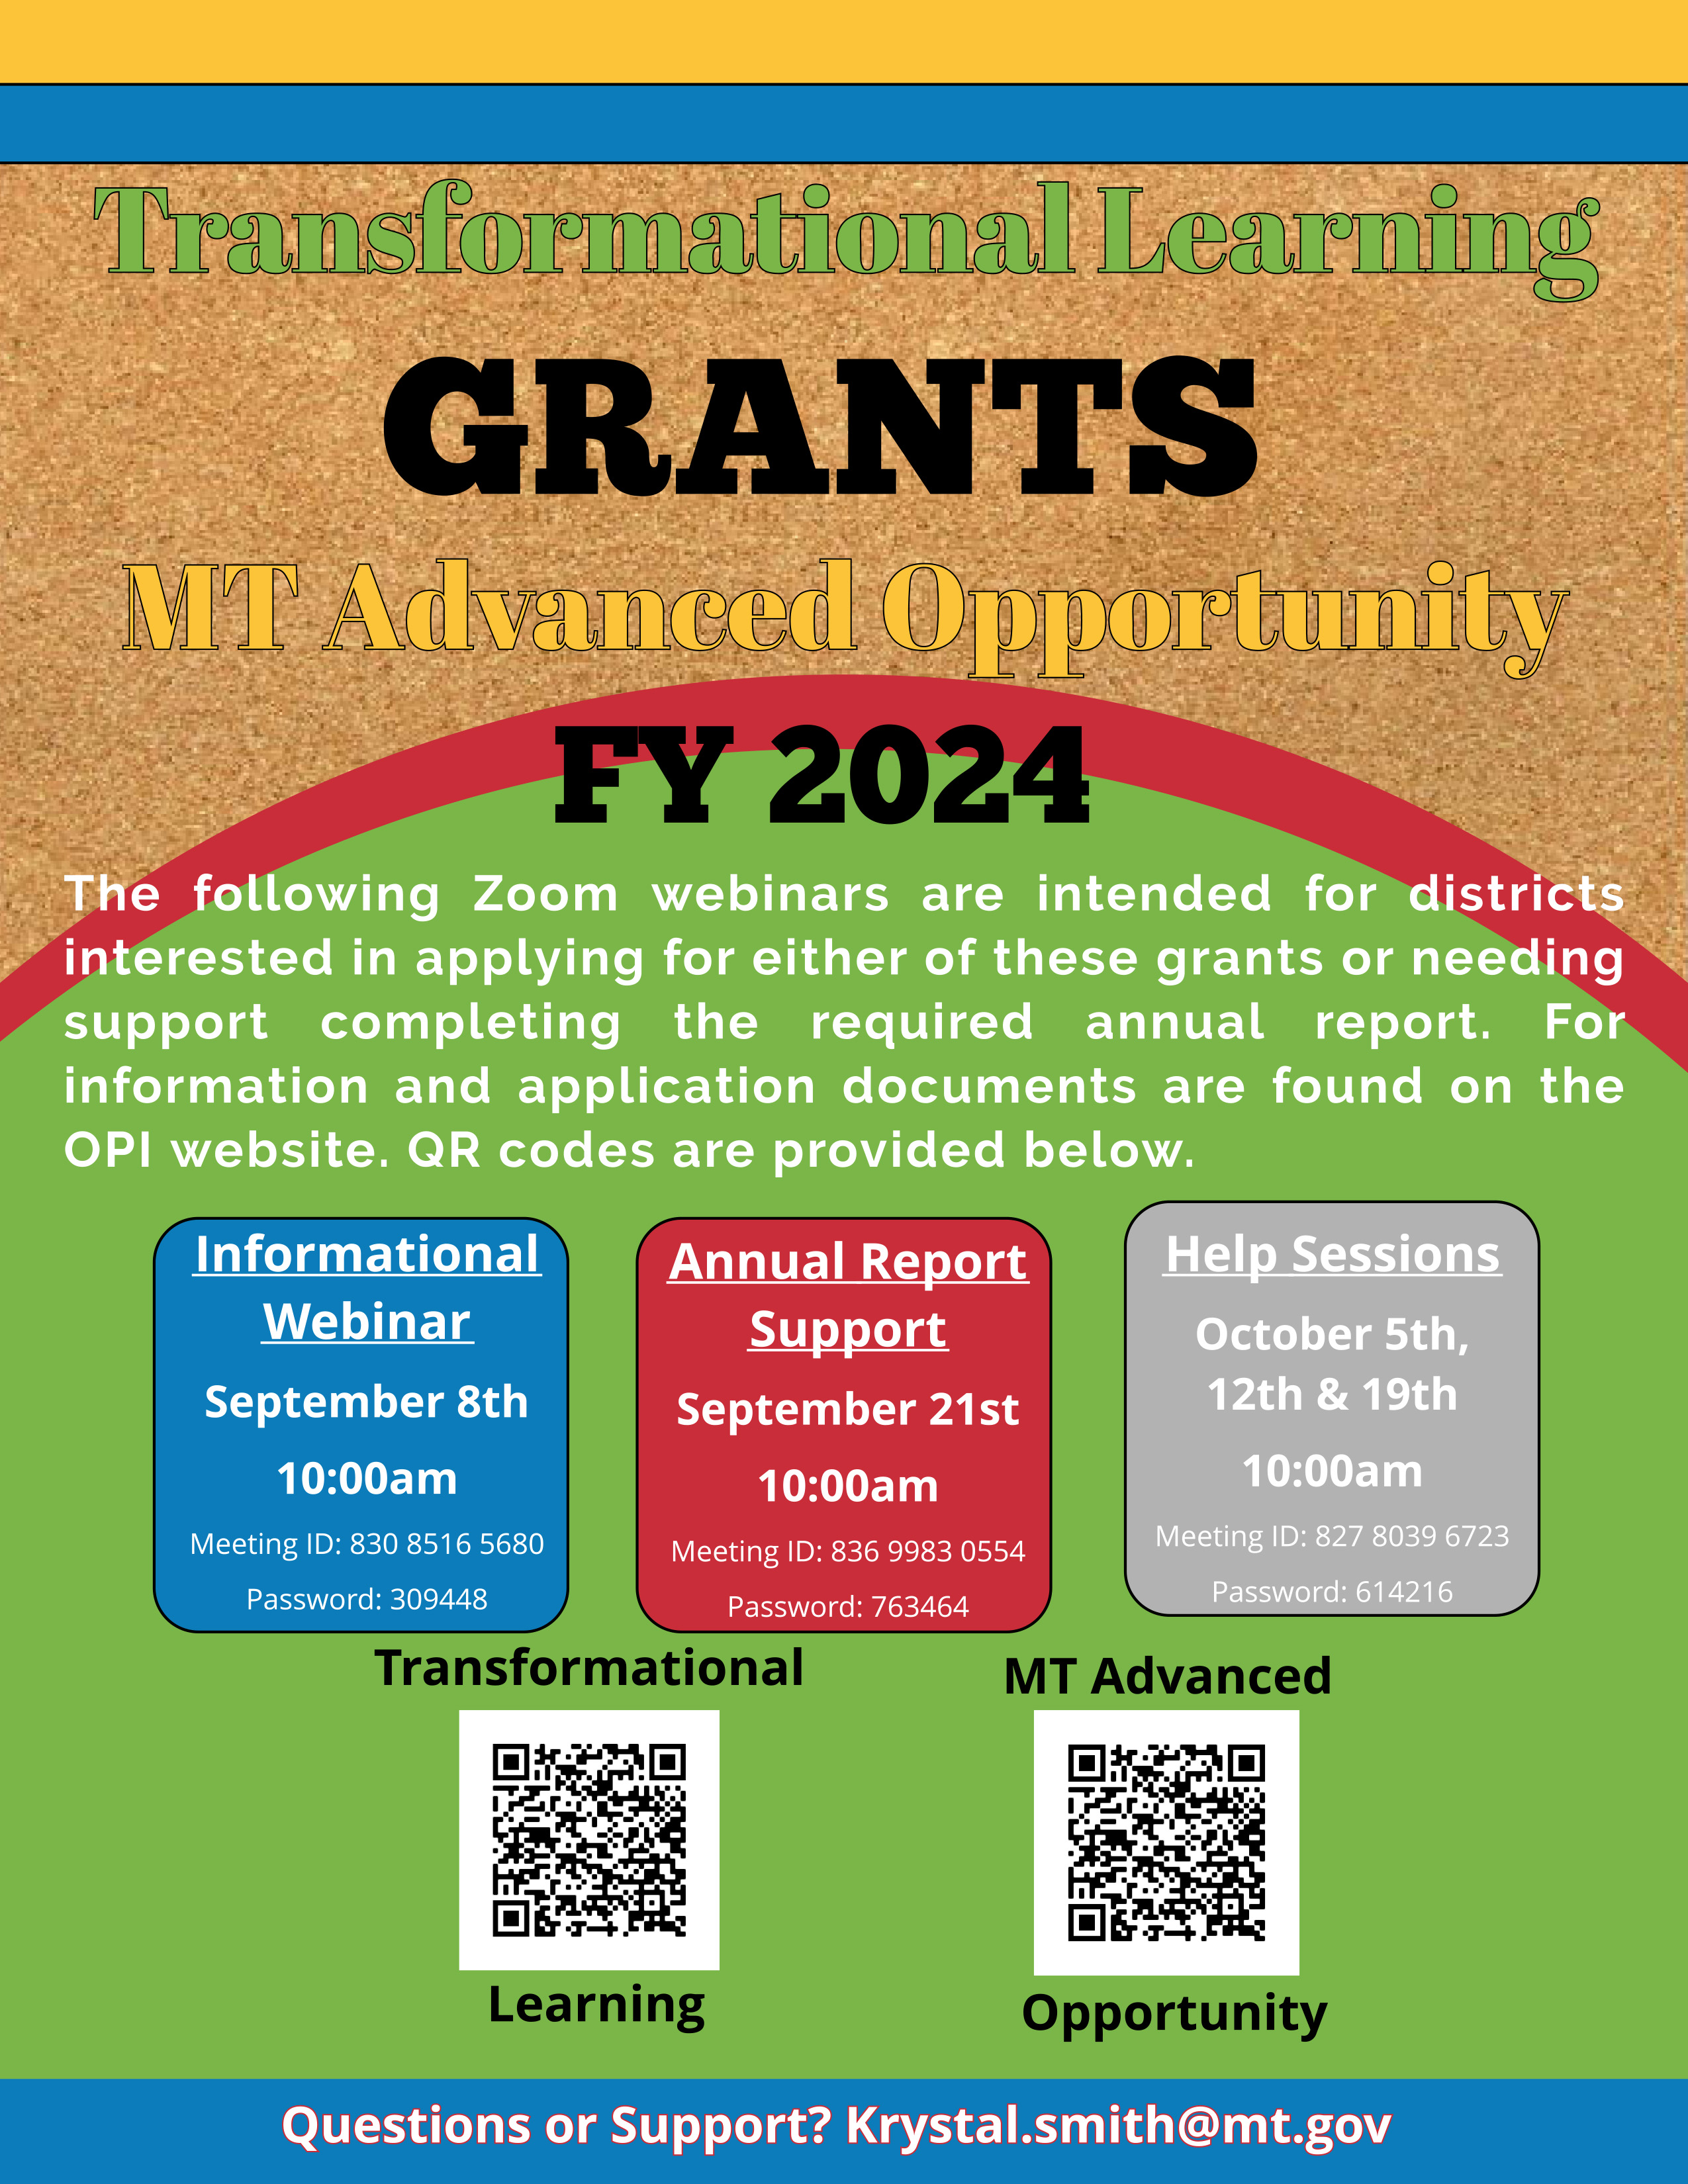 FY 2024 Transformational Learning & Montana Advanced Opportunity Webinars-  The following Zoom webinars are intended for districts interested in applying for either of these grants or needing support completing the required annual report.  Information and application documents can be found on the OPI website.  QR codes are provided below. Informational Webinar- September 8th at 10:00 am.  Meeting ID: 830 8516 5680; Password: 309448 Annual Report Support- September 21st at 10:00 am.  Meeting ID: 836 9983 0554; Password: 763464 Help Sessions- October 5th, 12th, and 19th at 10:00 am.  Meeting ID: 827 8039 6723; Password: 614216 Questions or Support? Krystal.Smith@mt.gov 